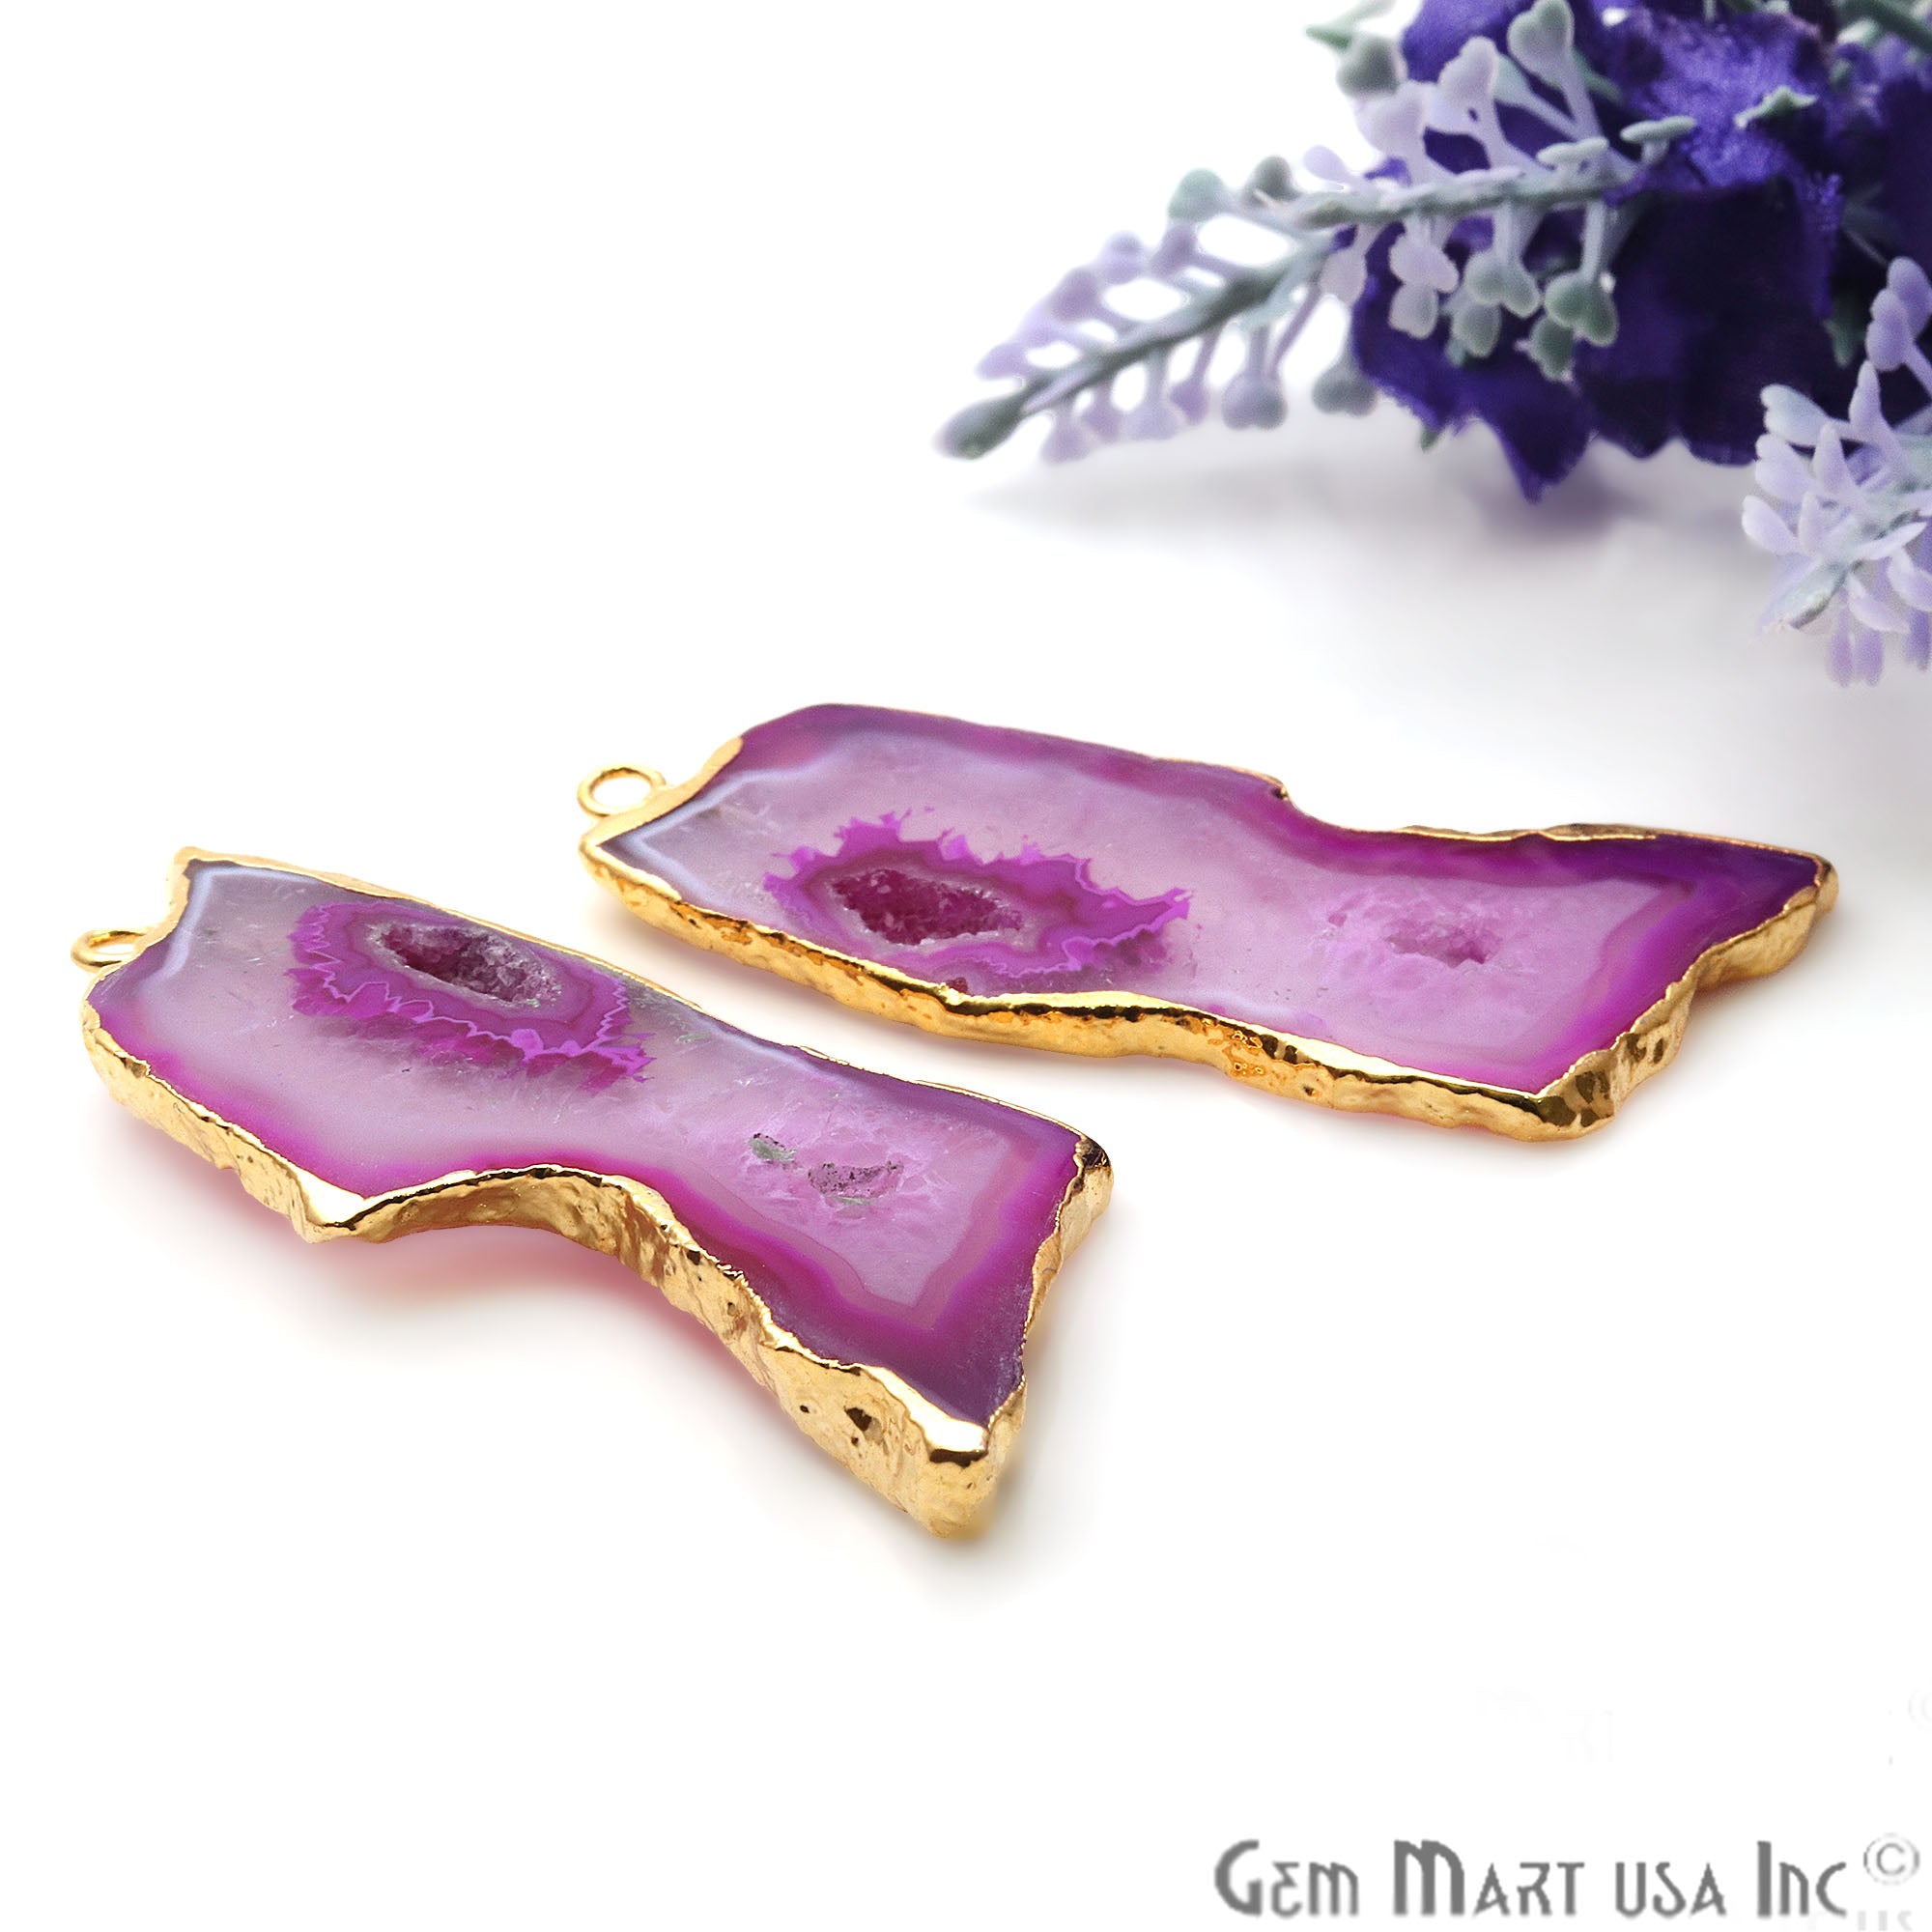 Agate Slice 21x42mm Organic Gold Electroplated Gemstone Earring Connector 1 Pair - GemMartUSA